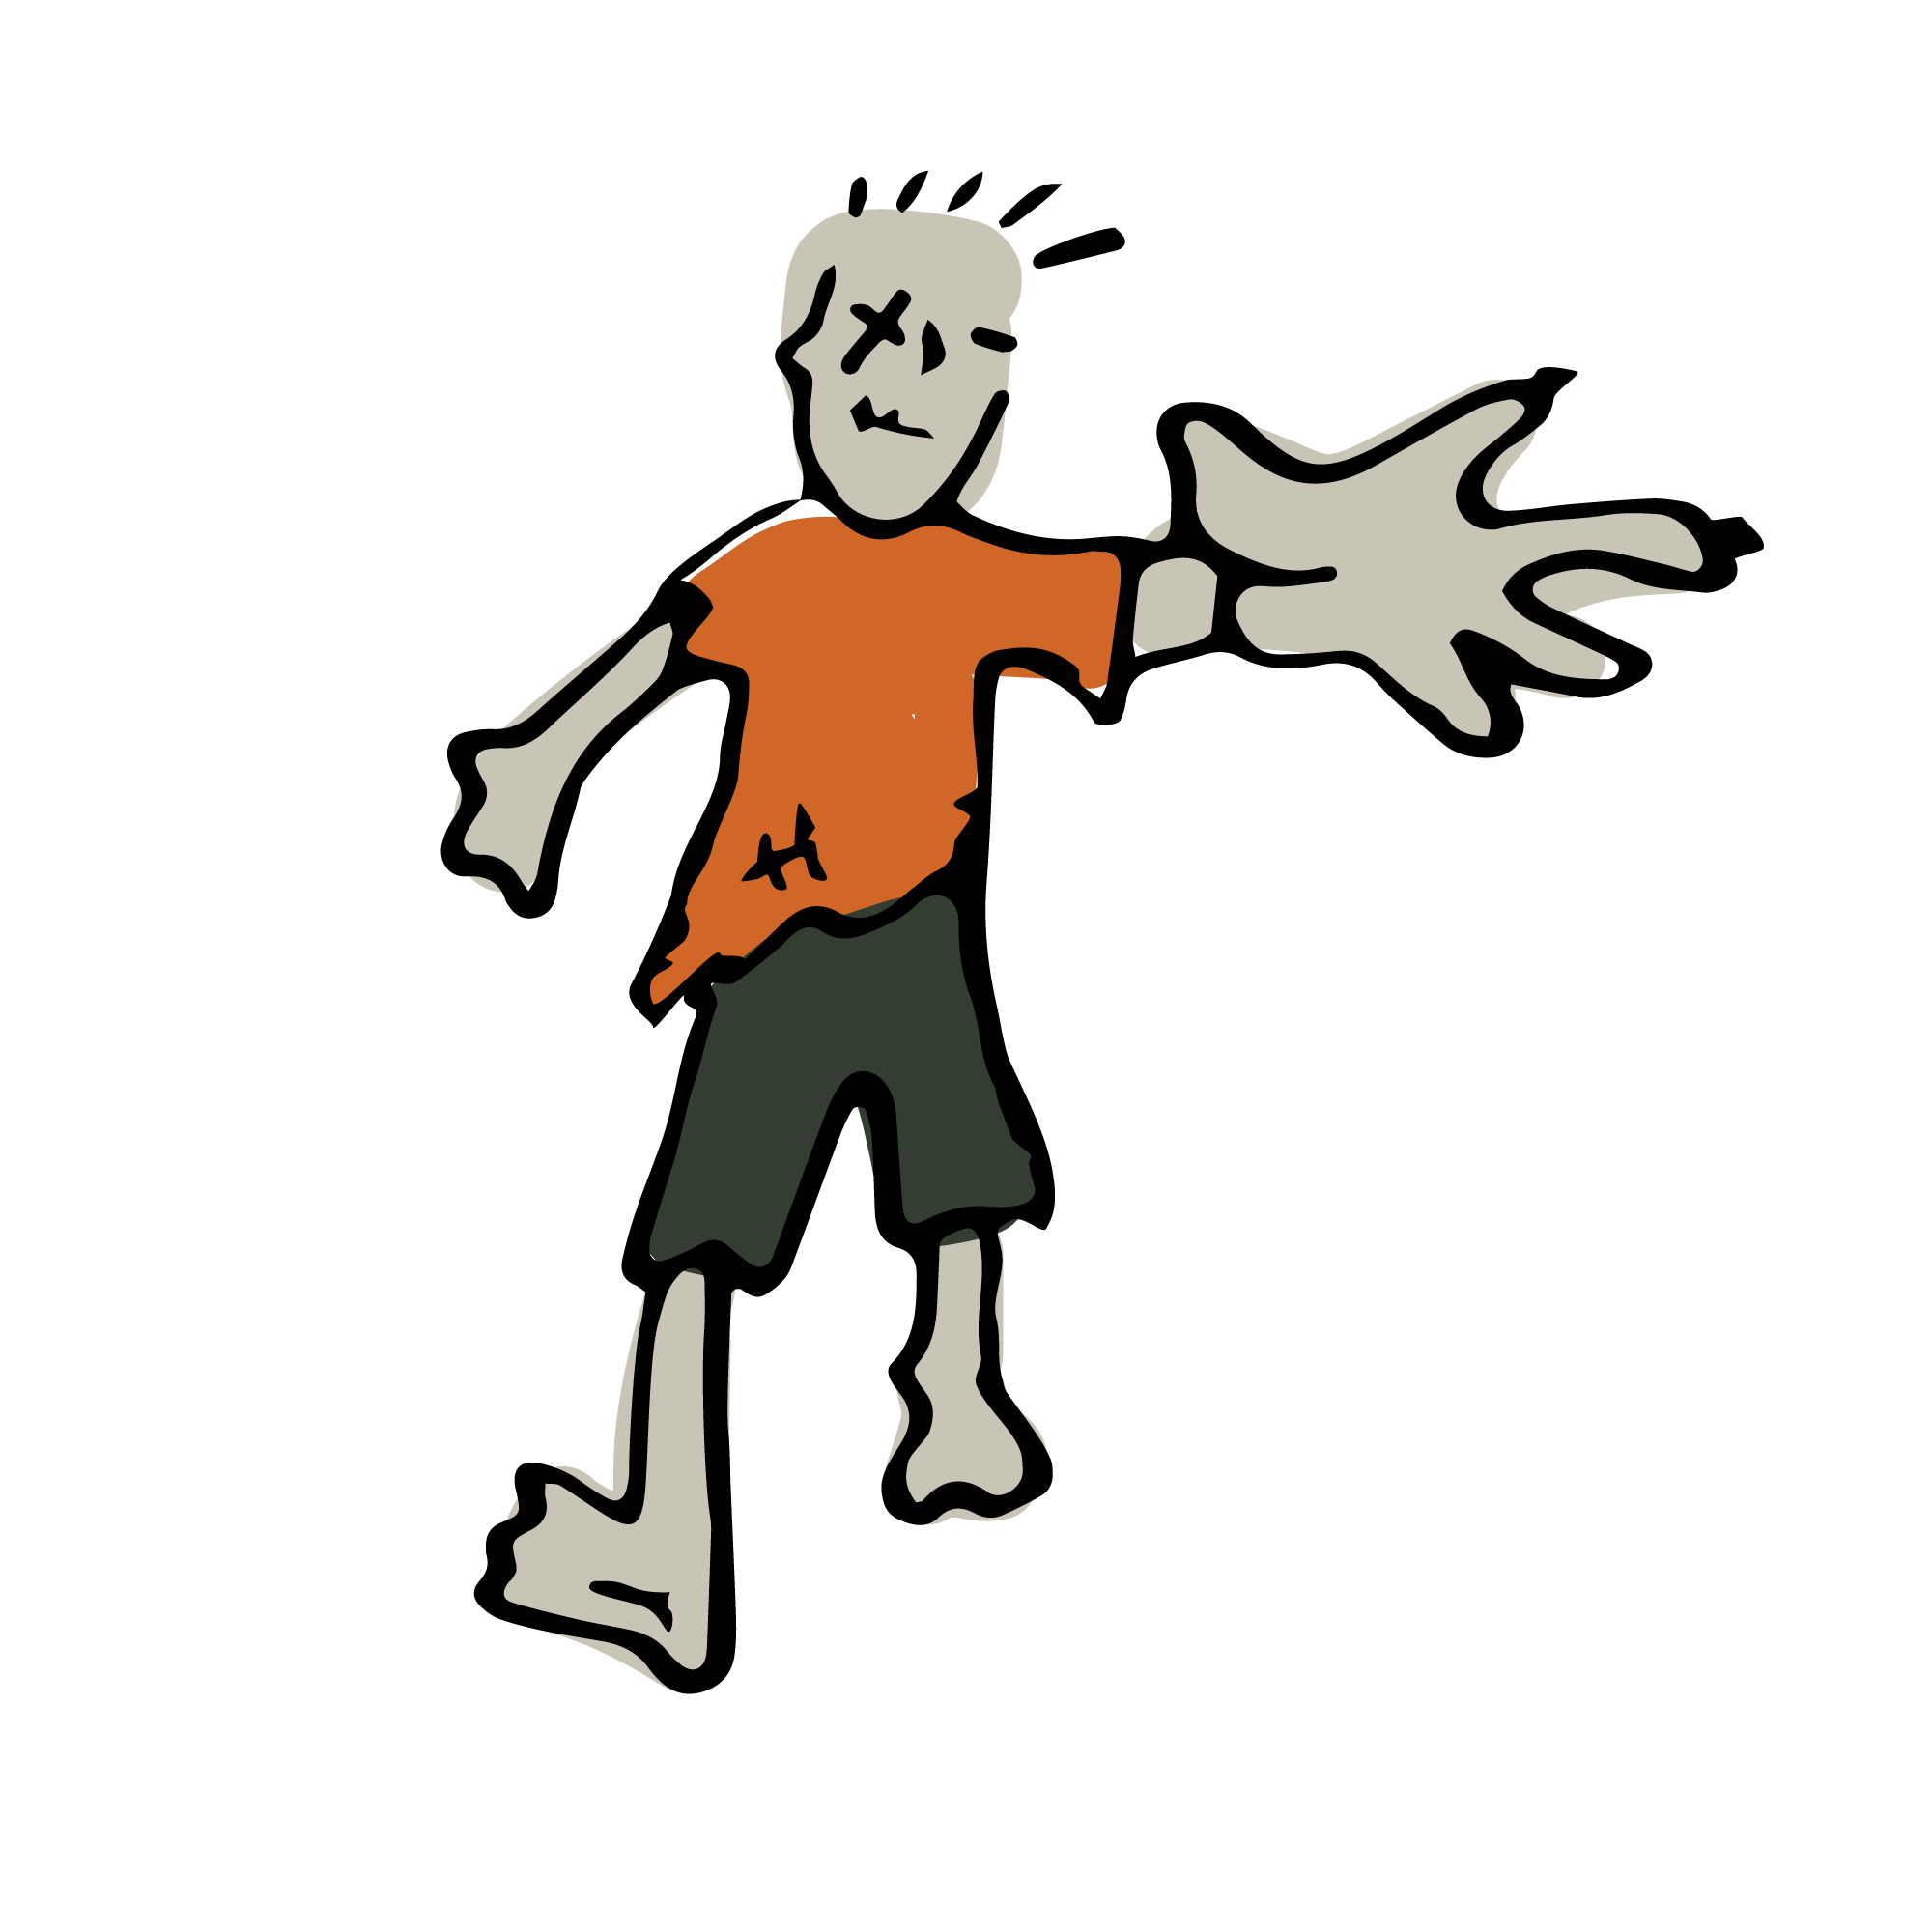 One illustrated zombie has its arm stretched toward the reader. His hand is large, ready to grab something.